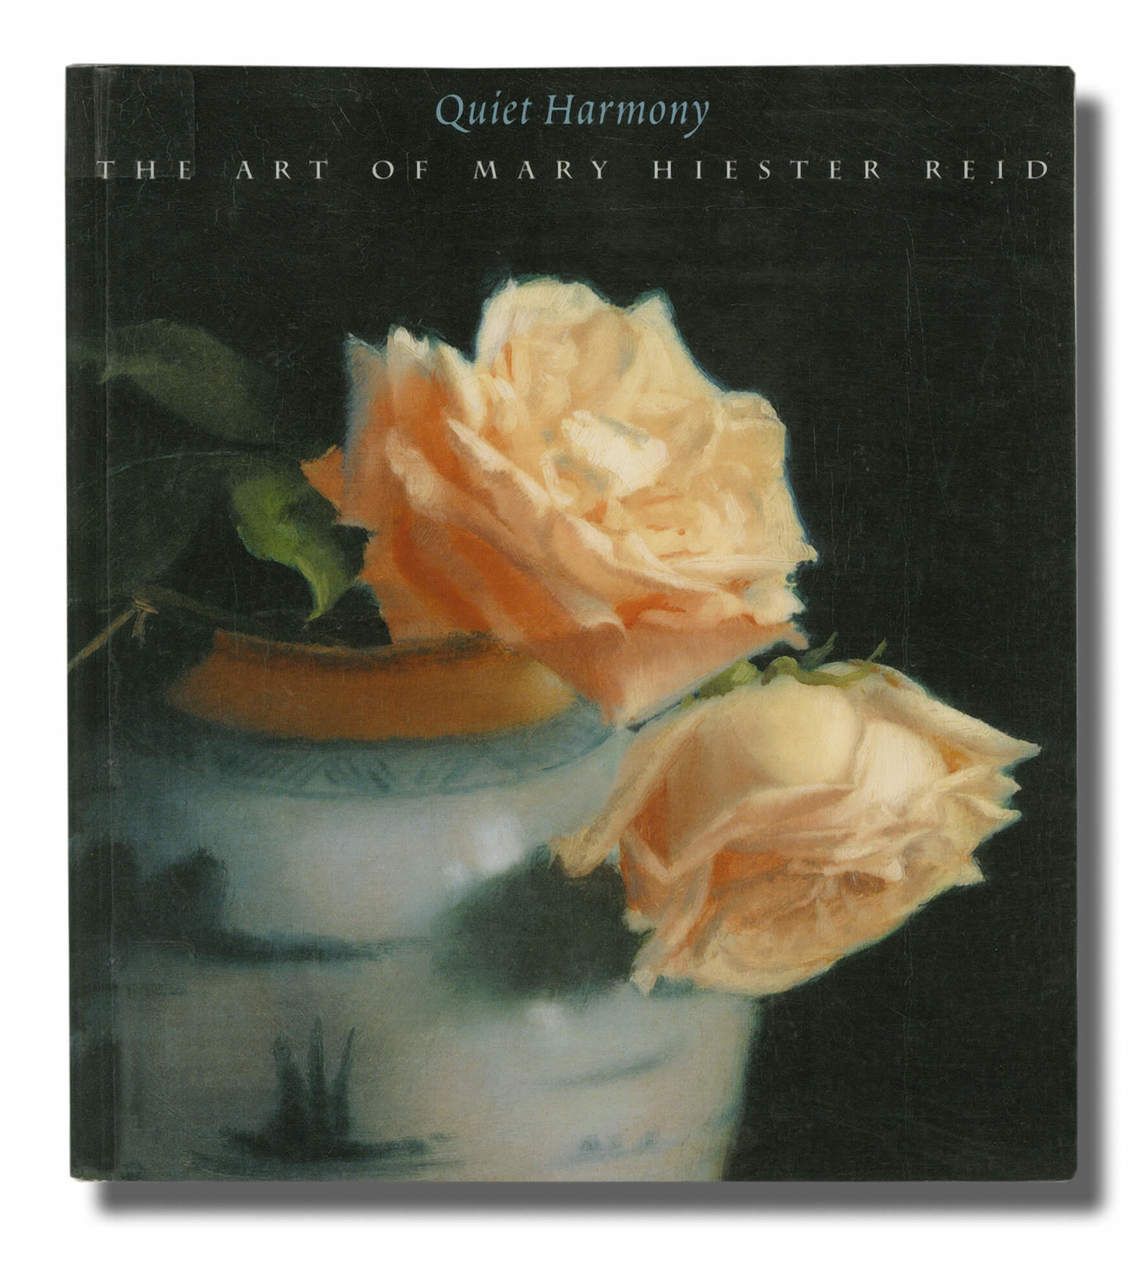 Exhibition catalogue for Quiet Harmony: The Art of Mary Hiester Reid, 2000, Art Gallery of Ontario, Toronto